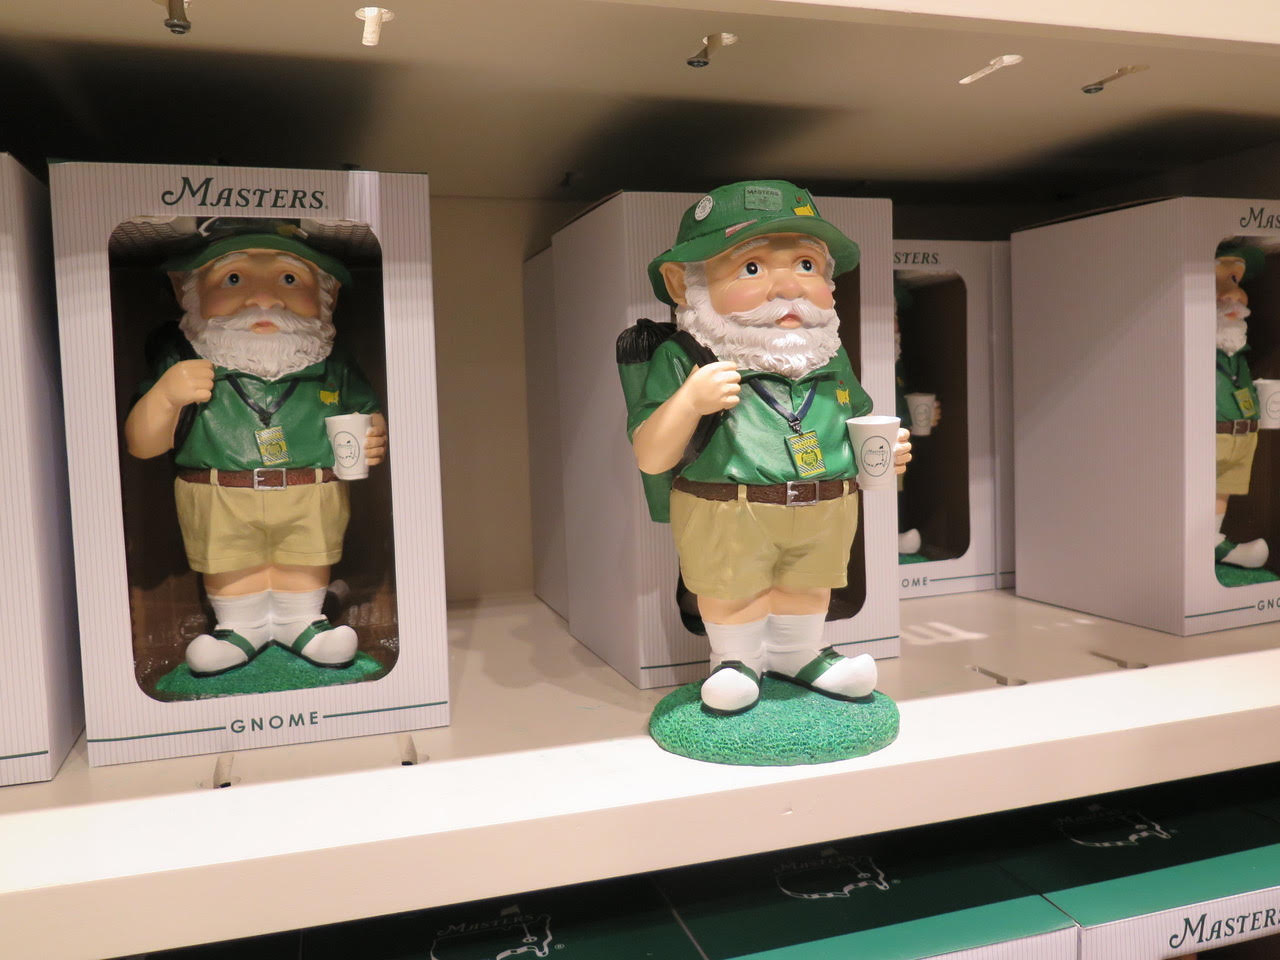 Masters: Best of Masters merchandise – 2019 Edition